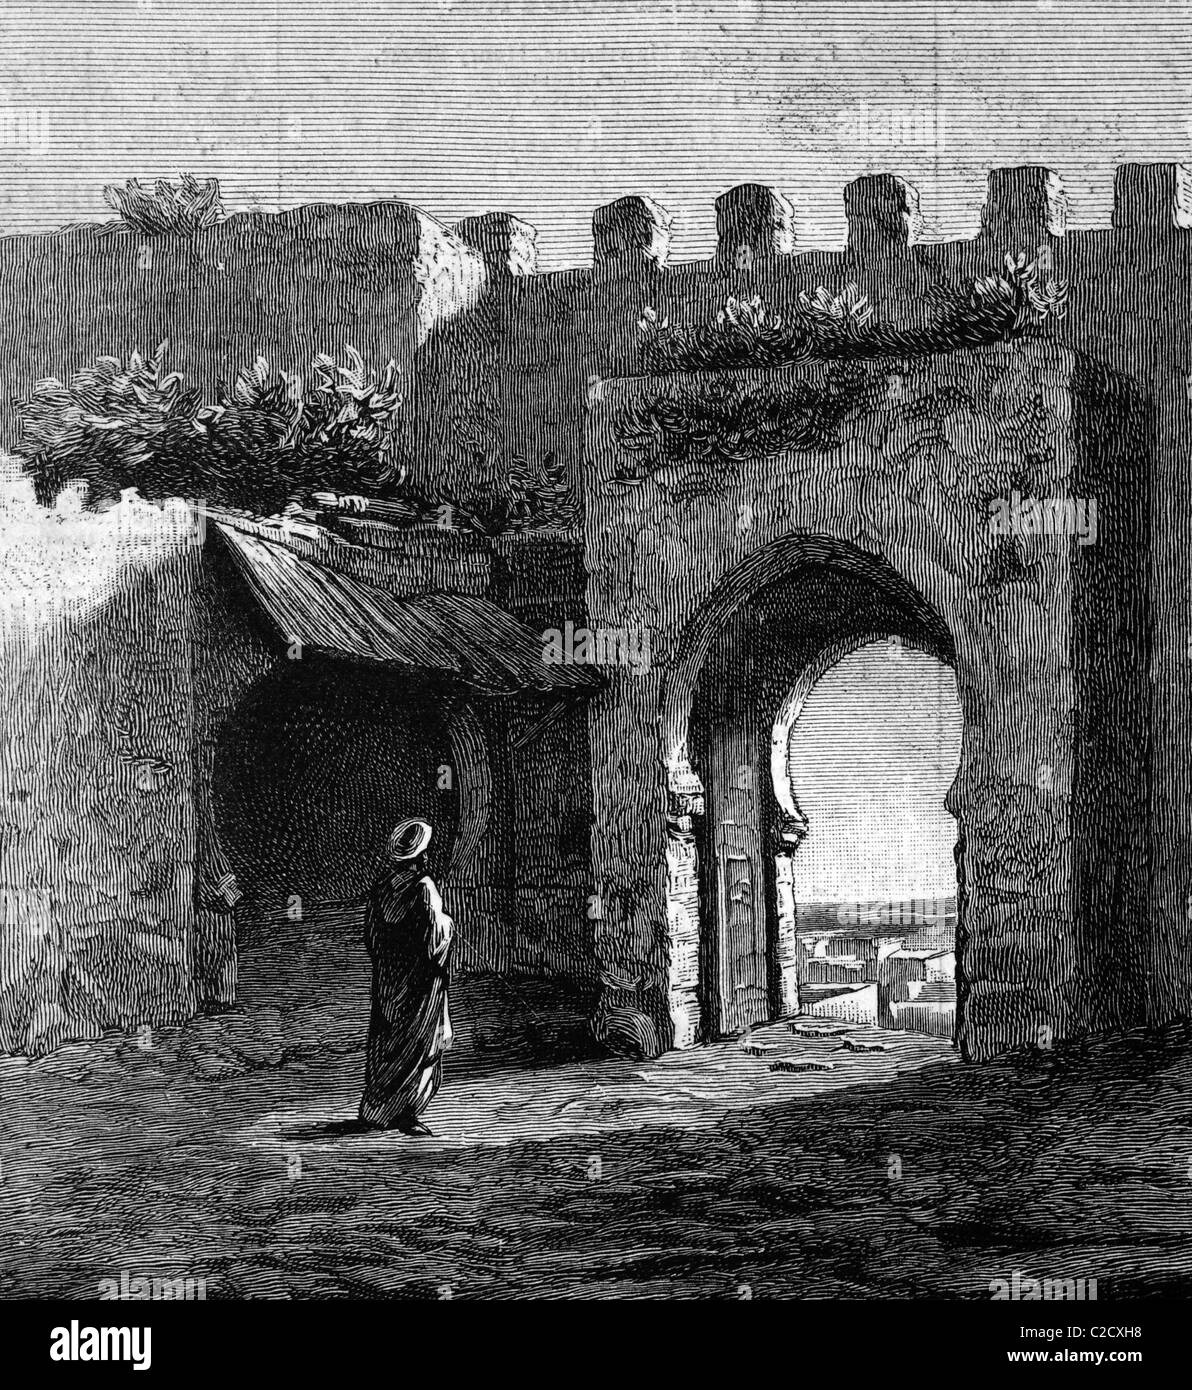 Archway in Tangier, Morocco, historic image, 1883 Stock Photo